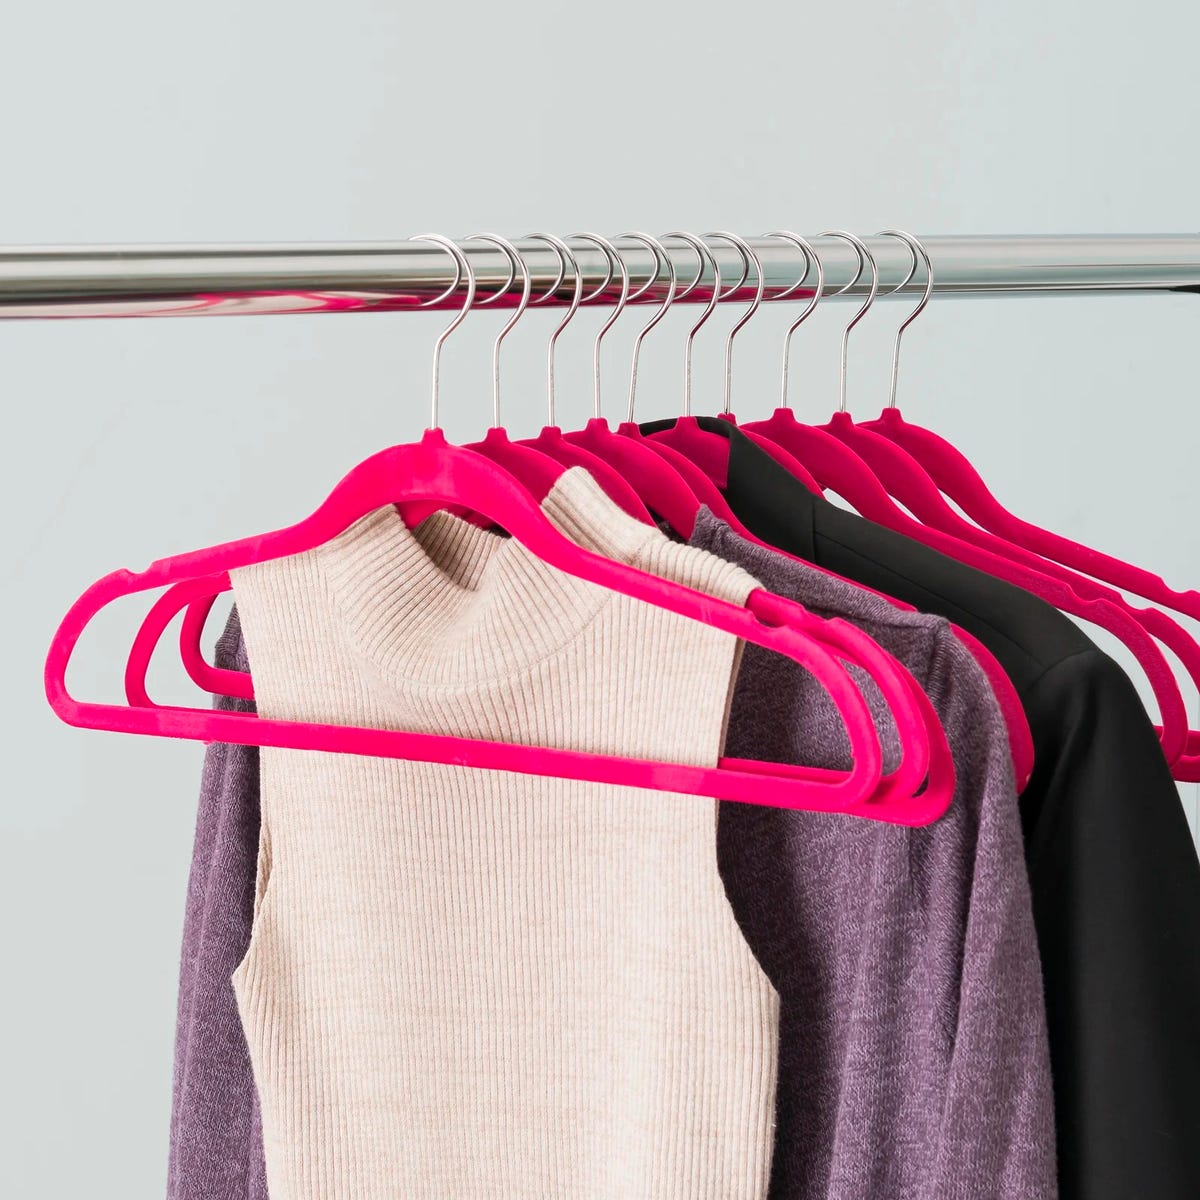 Clothes hanging on a pink plastic non-slip hanger